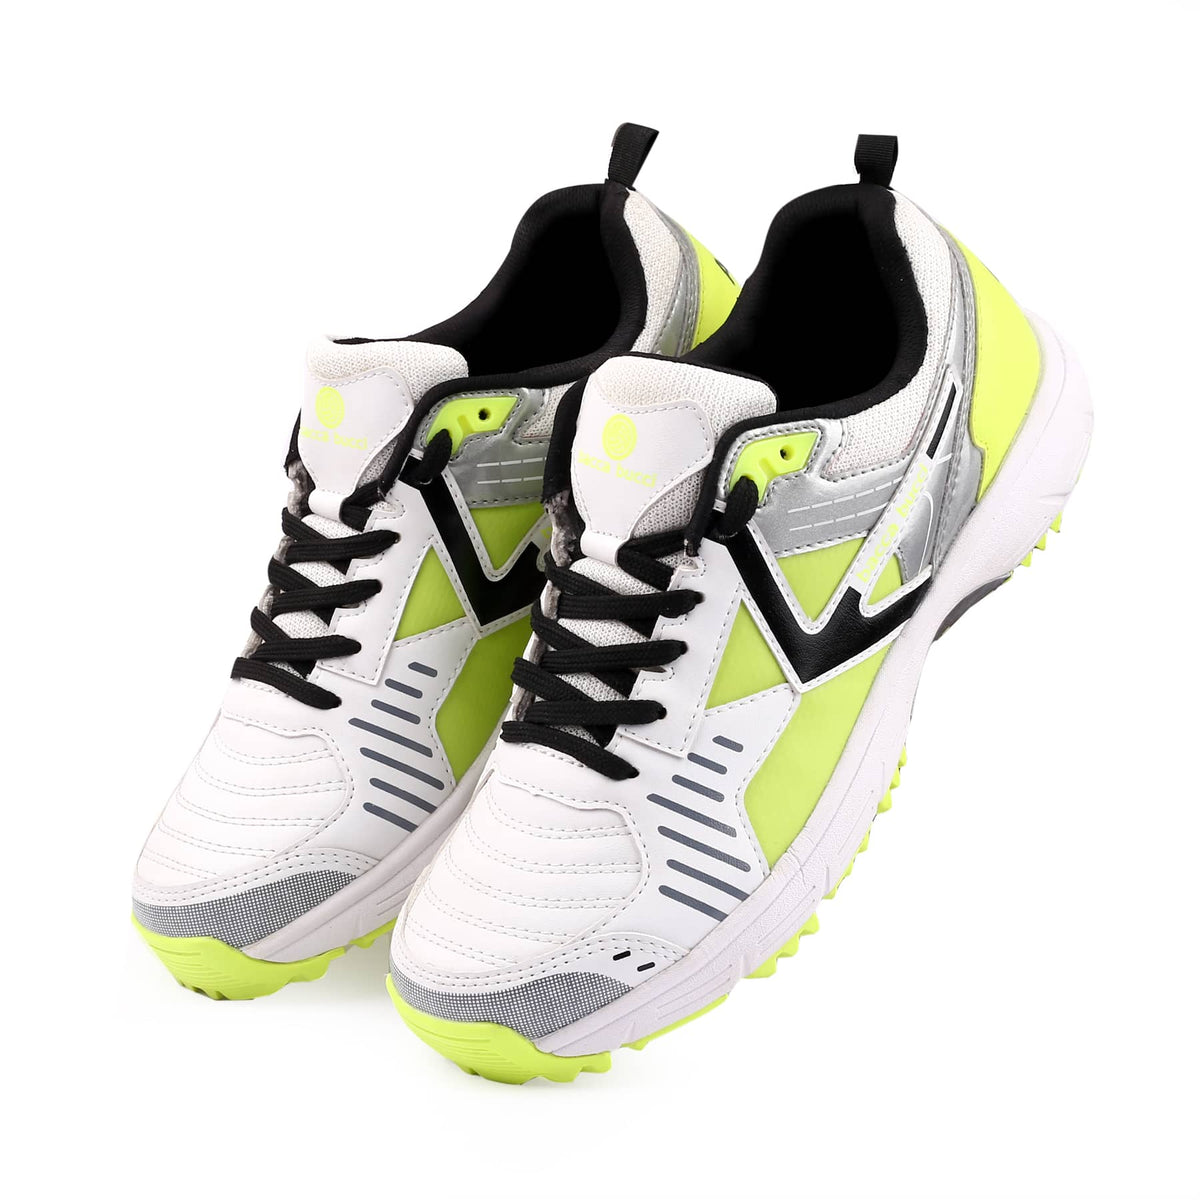 Bacca Bucci Boundary Blazers Cricket Shoes: Dynamic Flex Tech, Superior Traction Grip, Breathable Agility Fit, High-Impact Shock Absorption